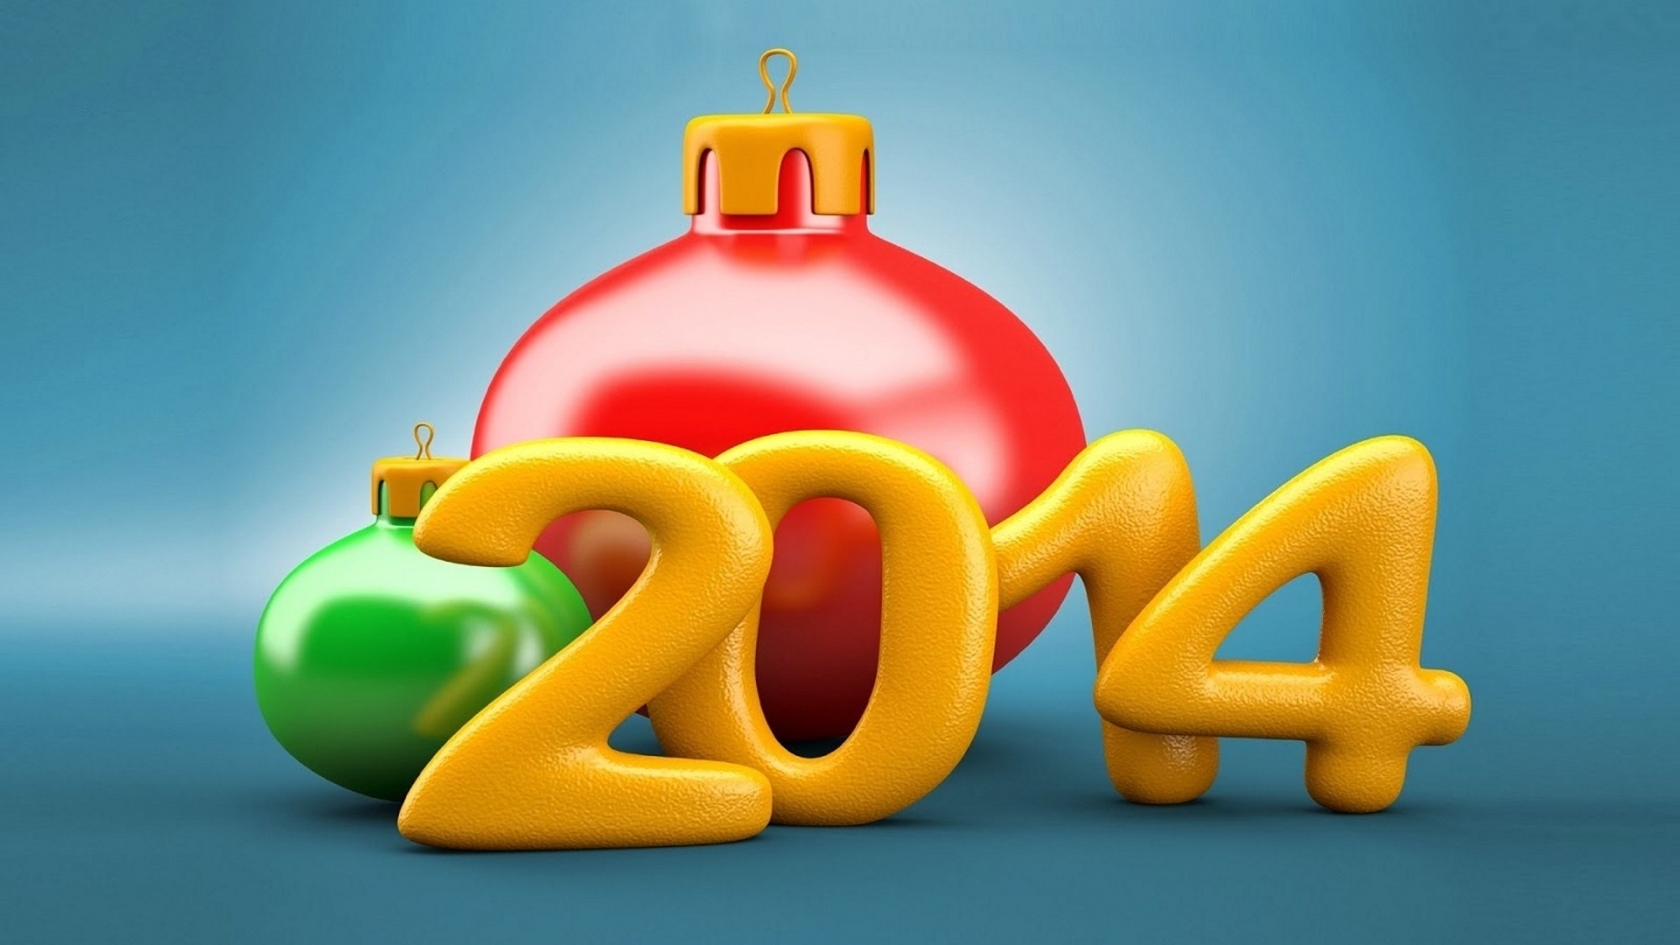 New Year 2014 for 1680 x 945 HDTV resolution